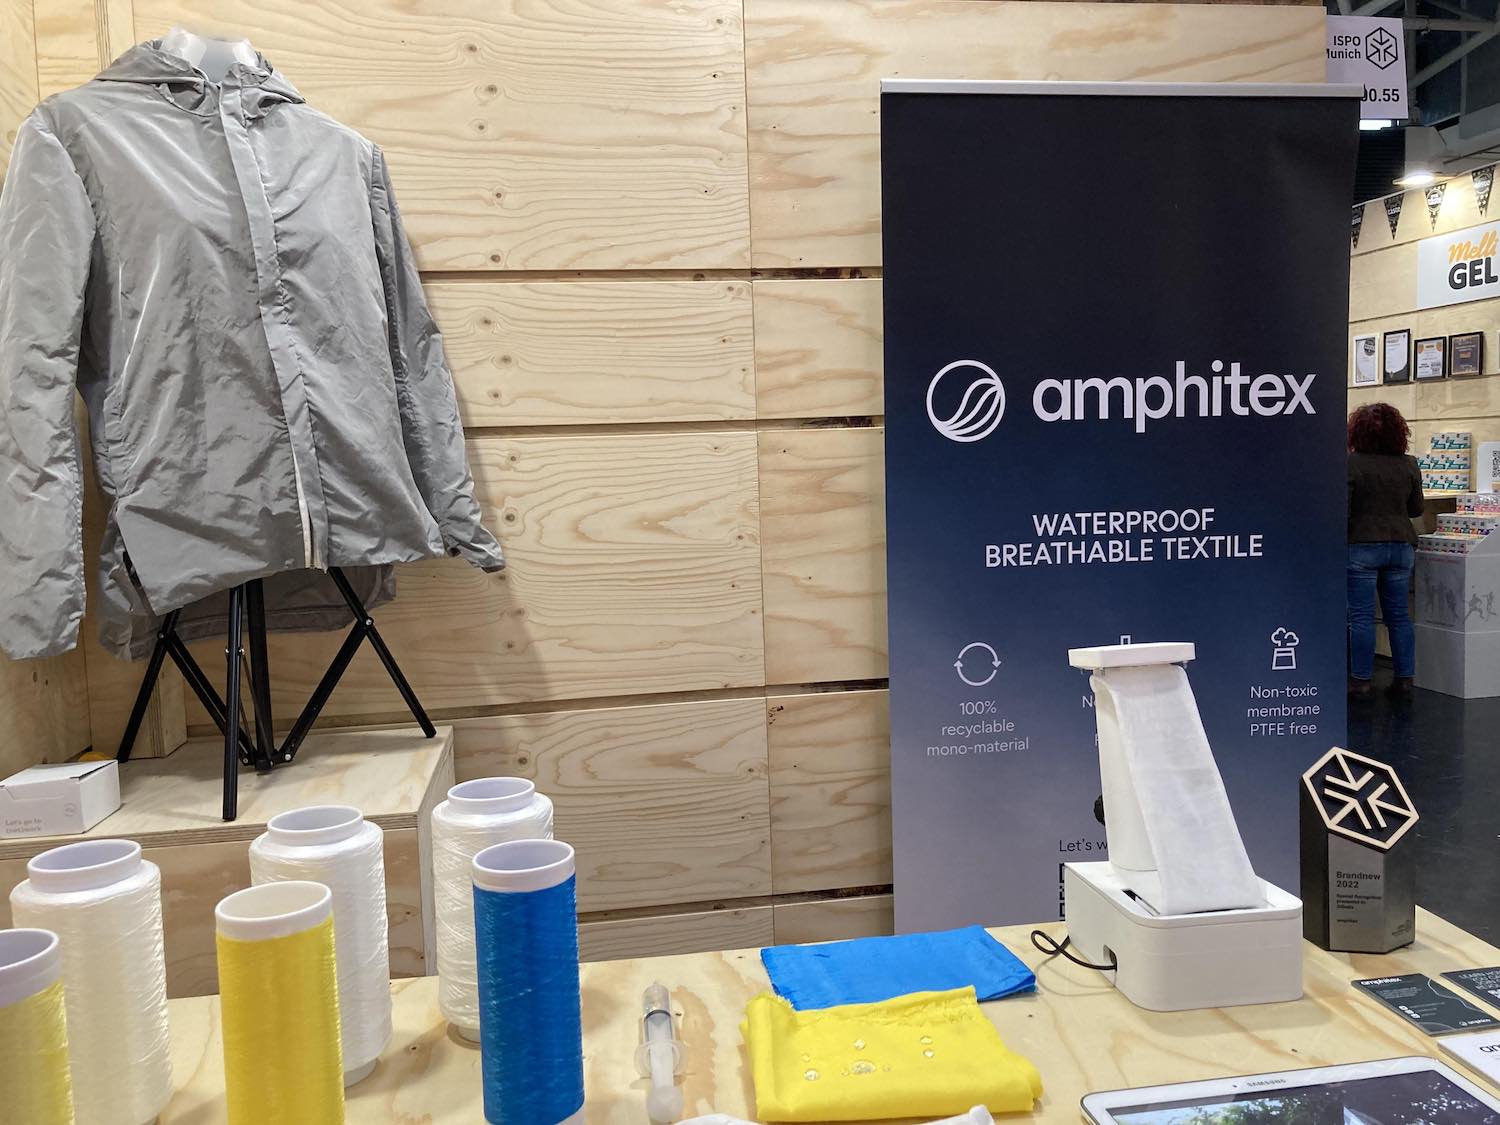 Amphico waterproof yarns and textiles at ISPO 2022. © Anne Prahl